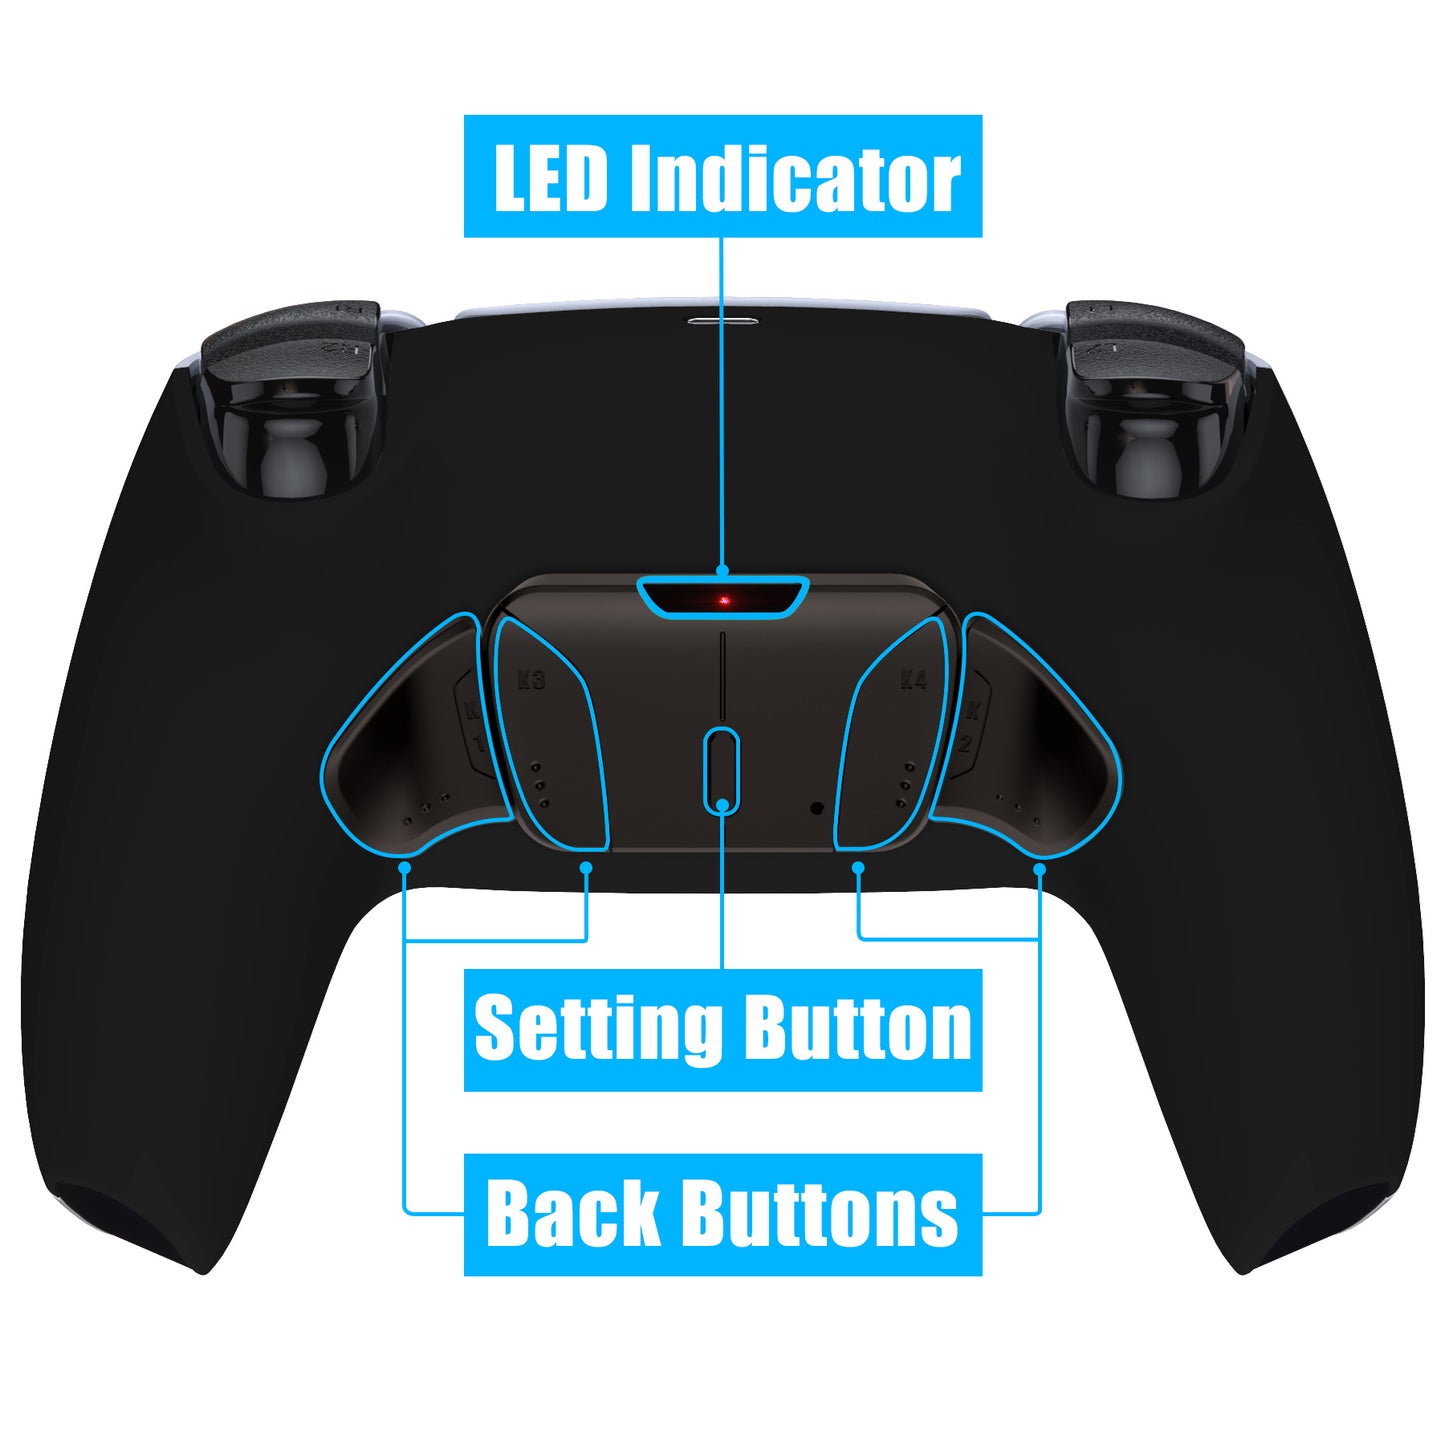 eXtremeRate Retail Black Remappable Real Metal Buttons (RMB) Version RISE4 Remap Kit for PS5 Controller BDM 010 & BDM 020, Upgrade Board & Redesigned Back Shell & 4 Back Buttons for PS5 Controller - YPFJ7005